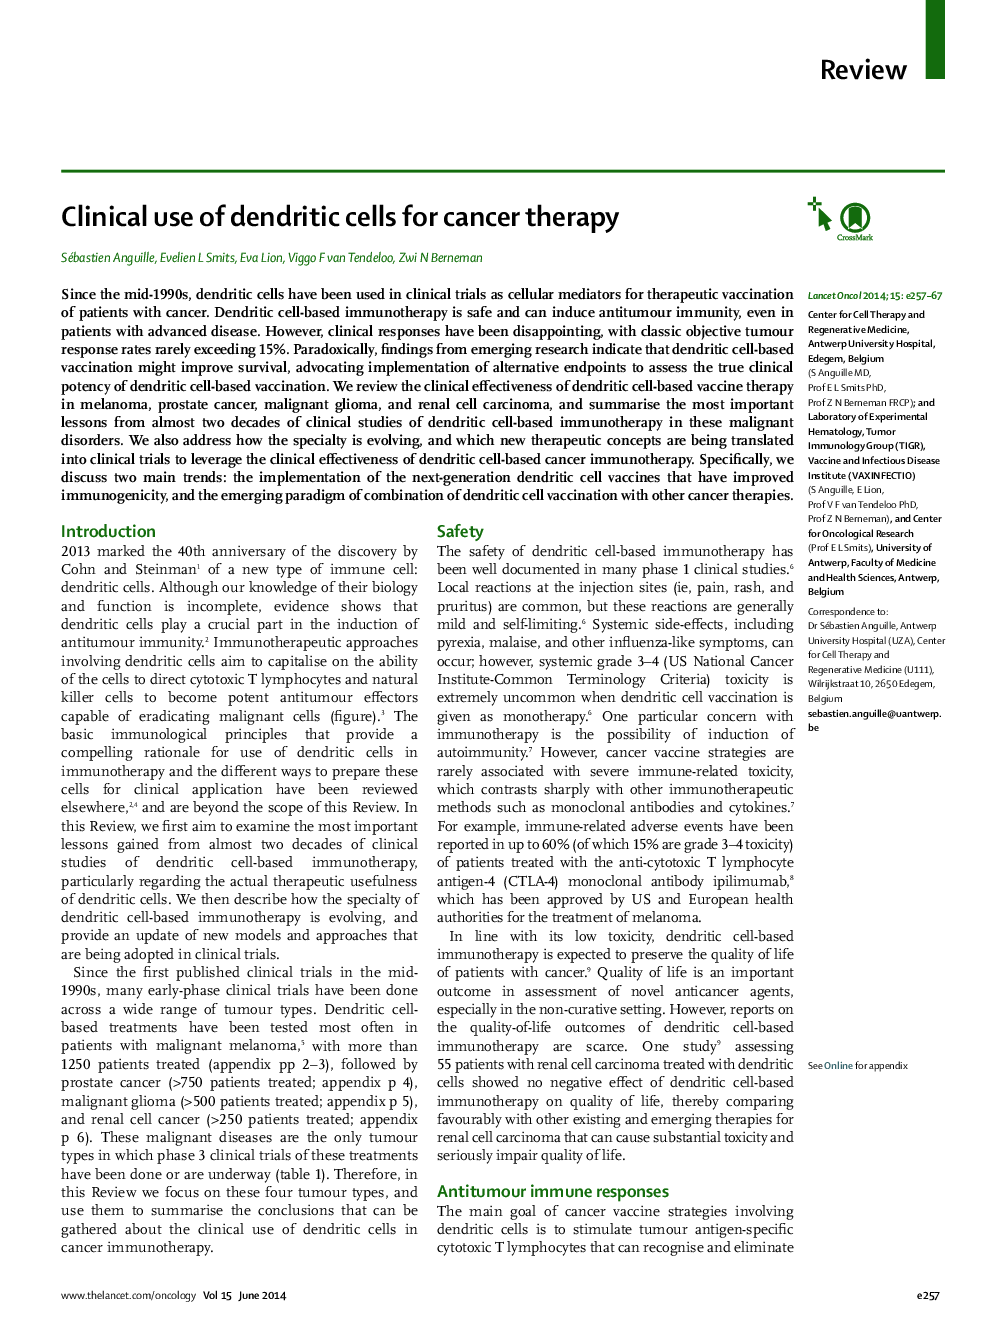 Clinical use of dendritic cells for cancer therapy